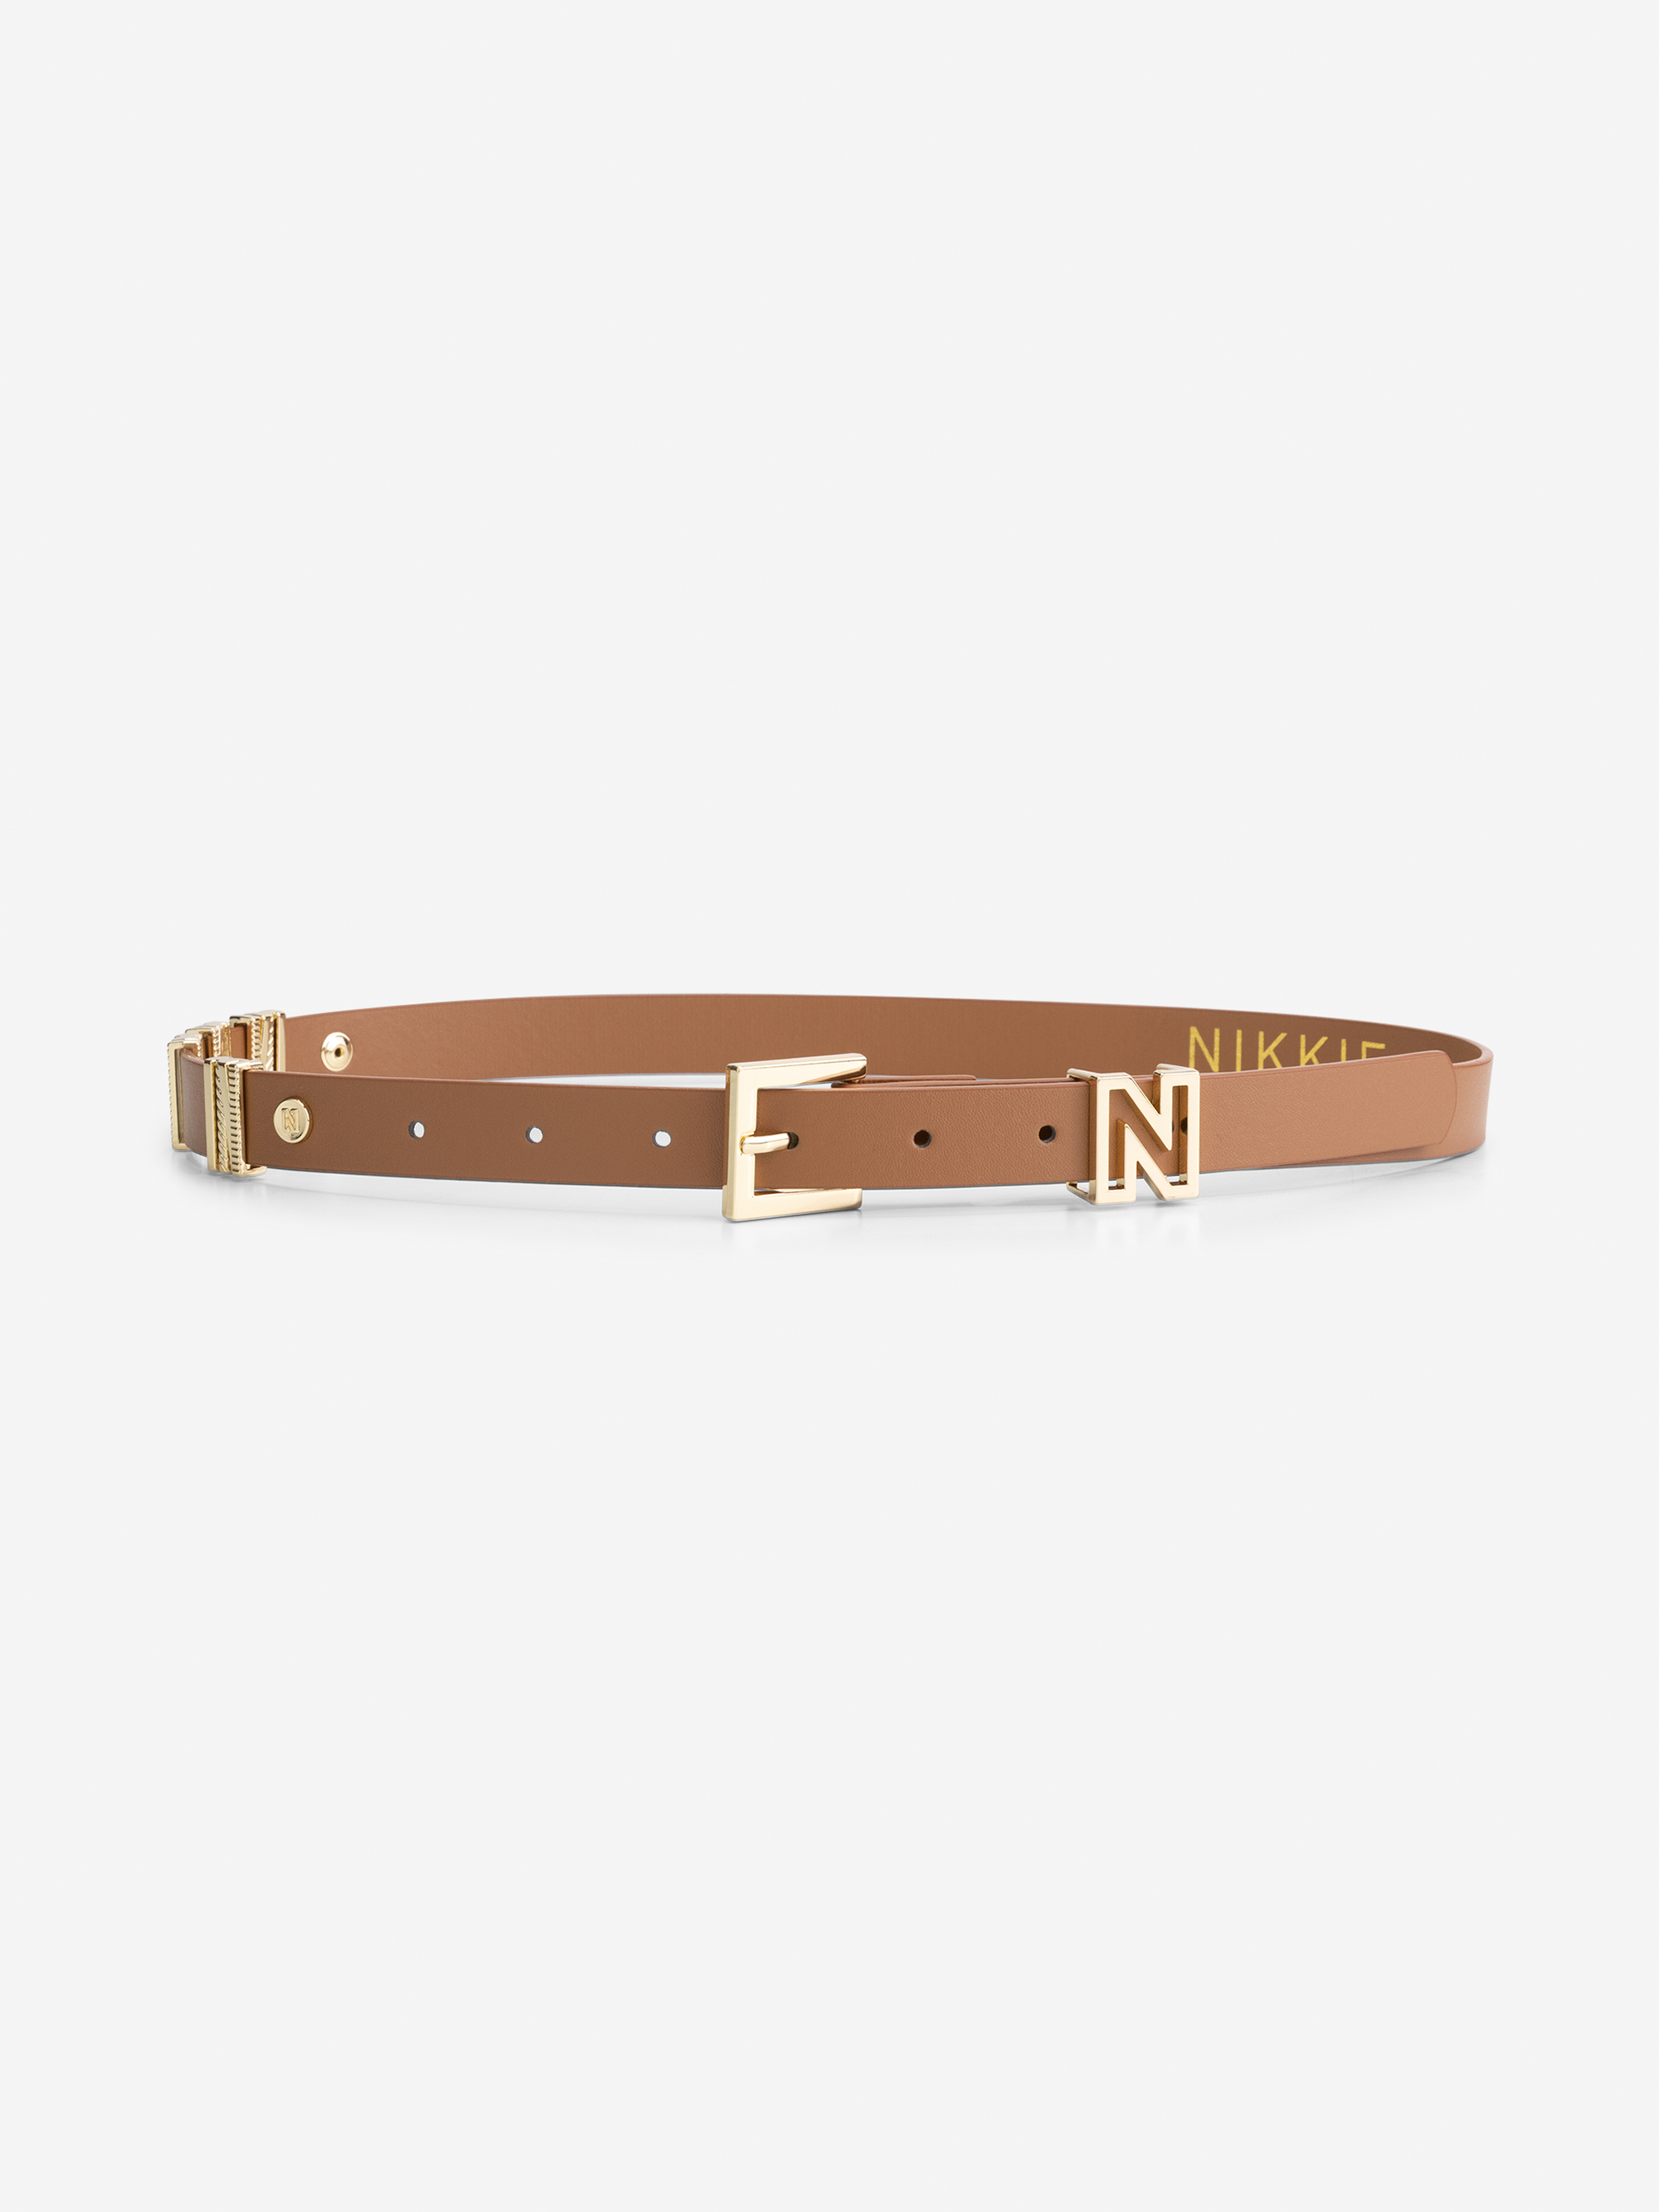  Dunne taille riem 